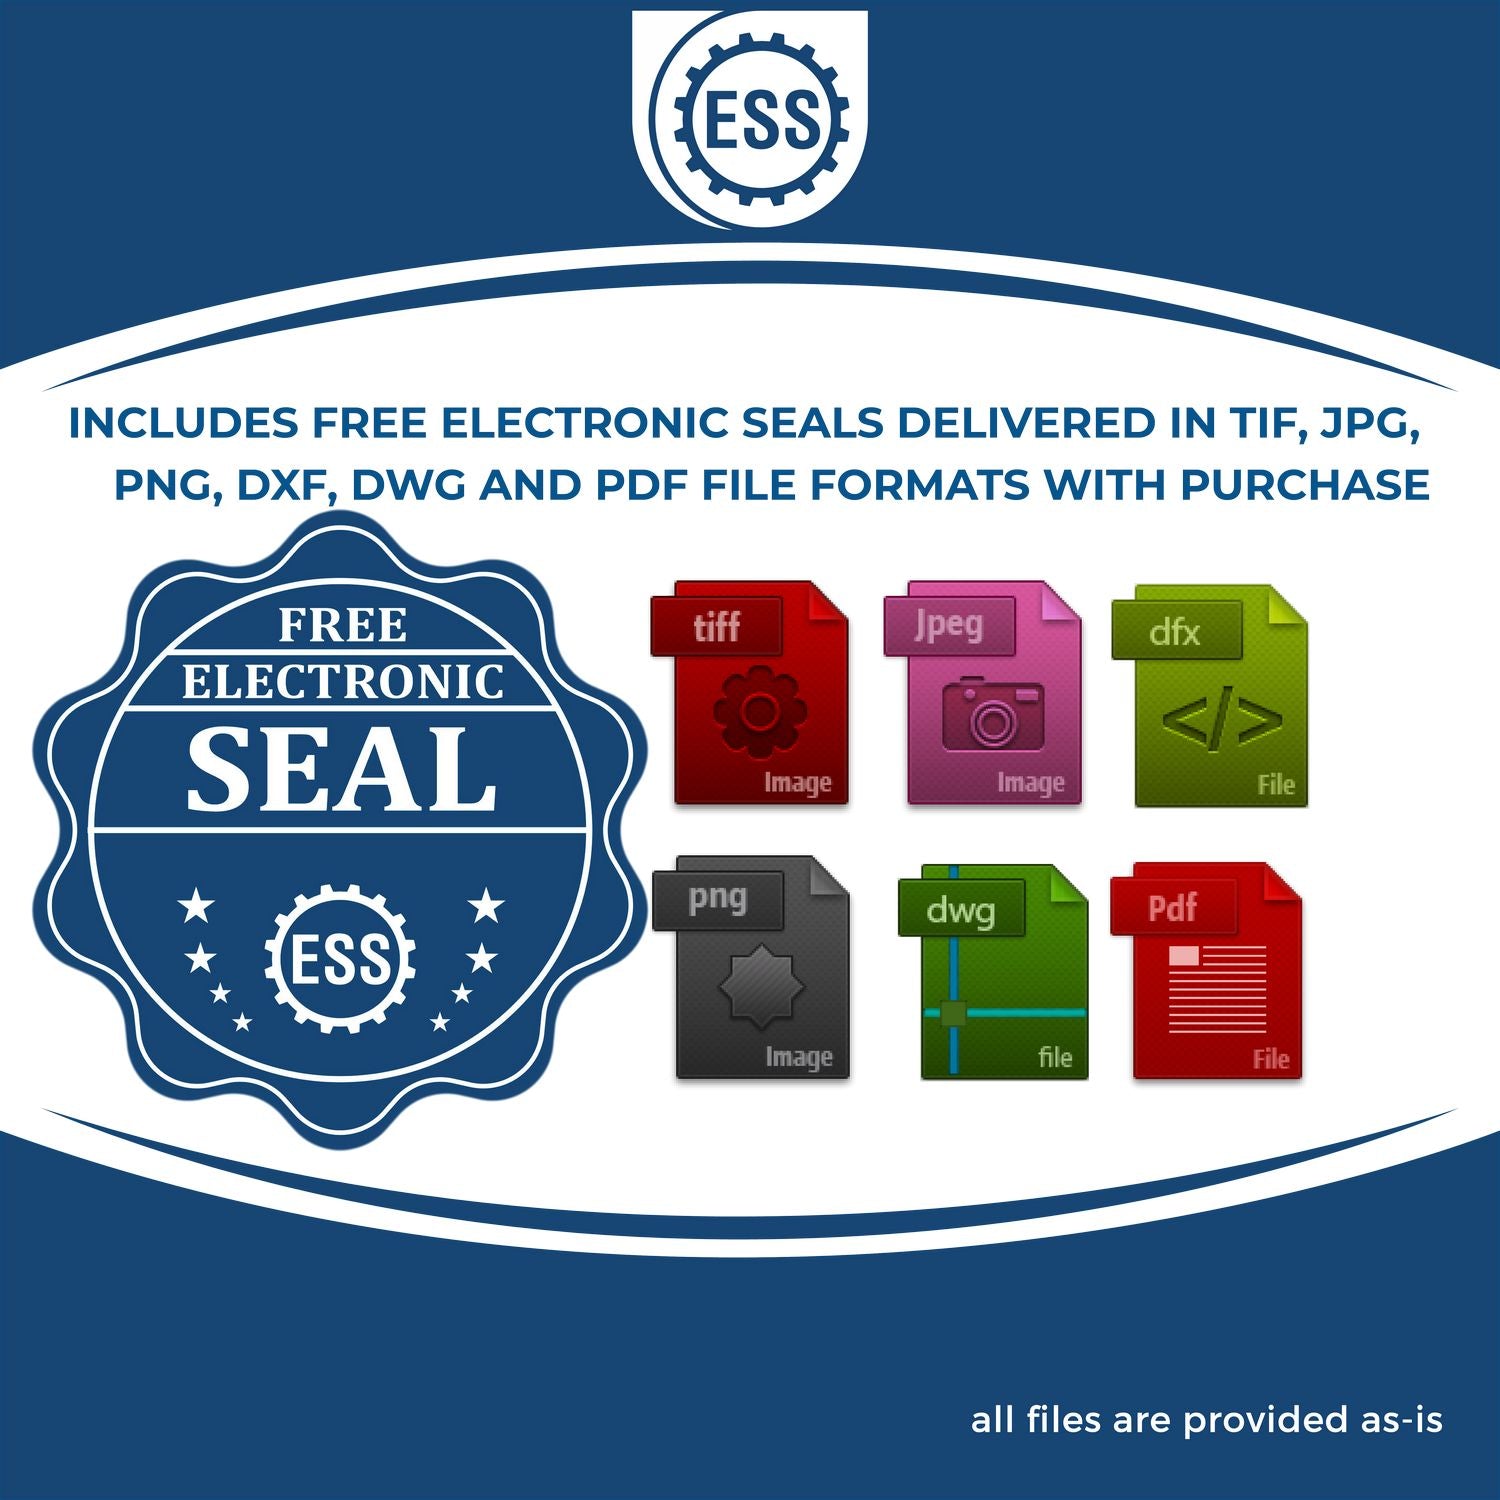 An infographic for the free electronic seal for the Handheld New York Land Surveyor Seal illustrating the different file type icons such as DXF, DWG, TIF, JPG and PNG.